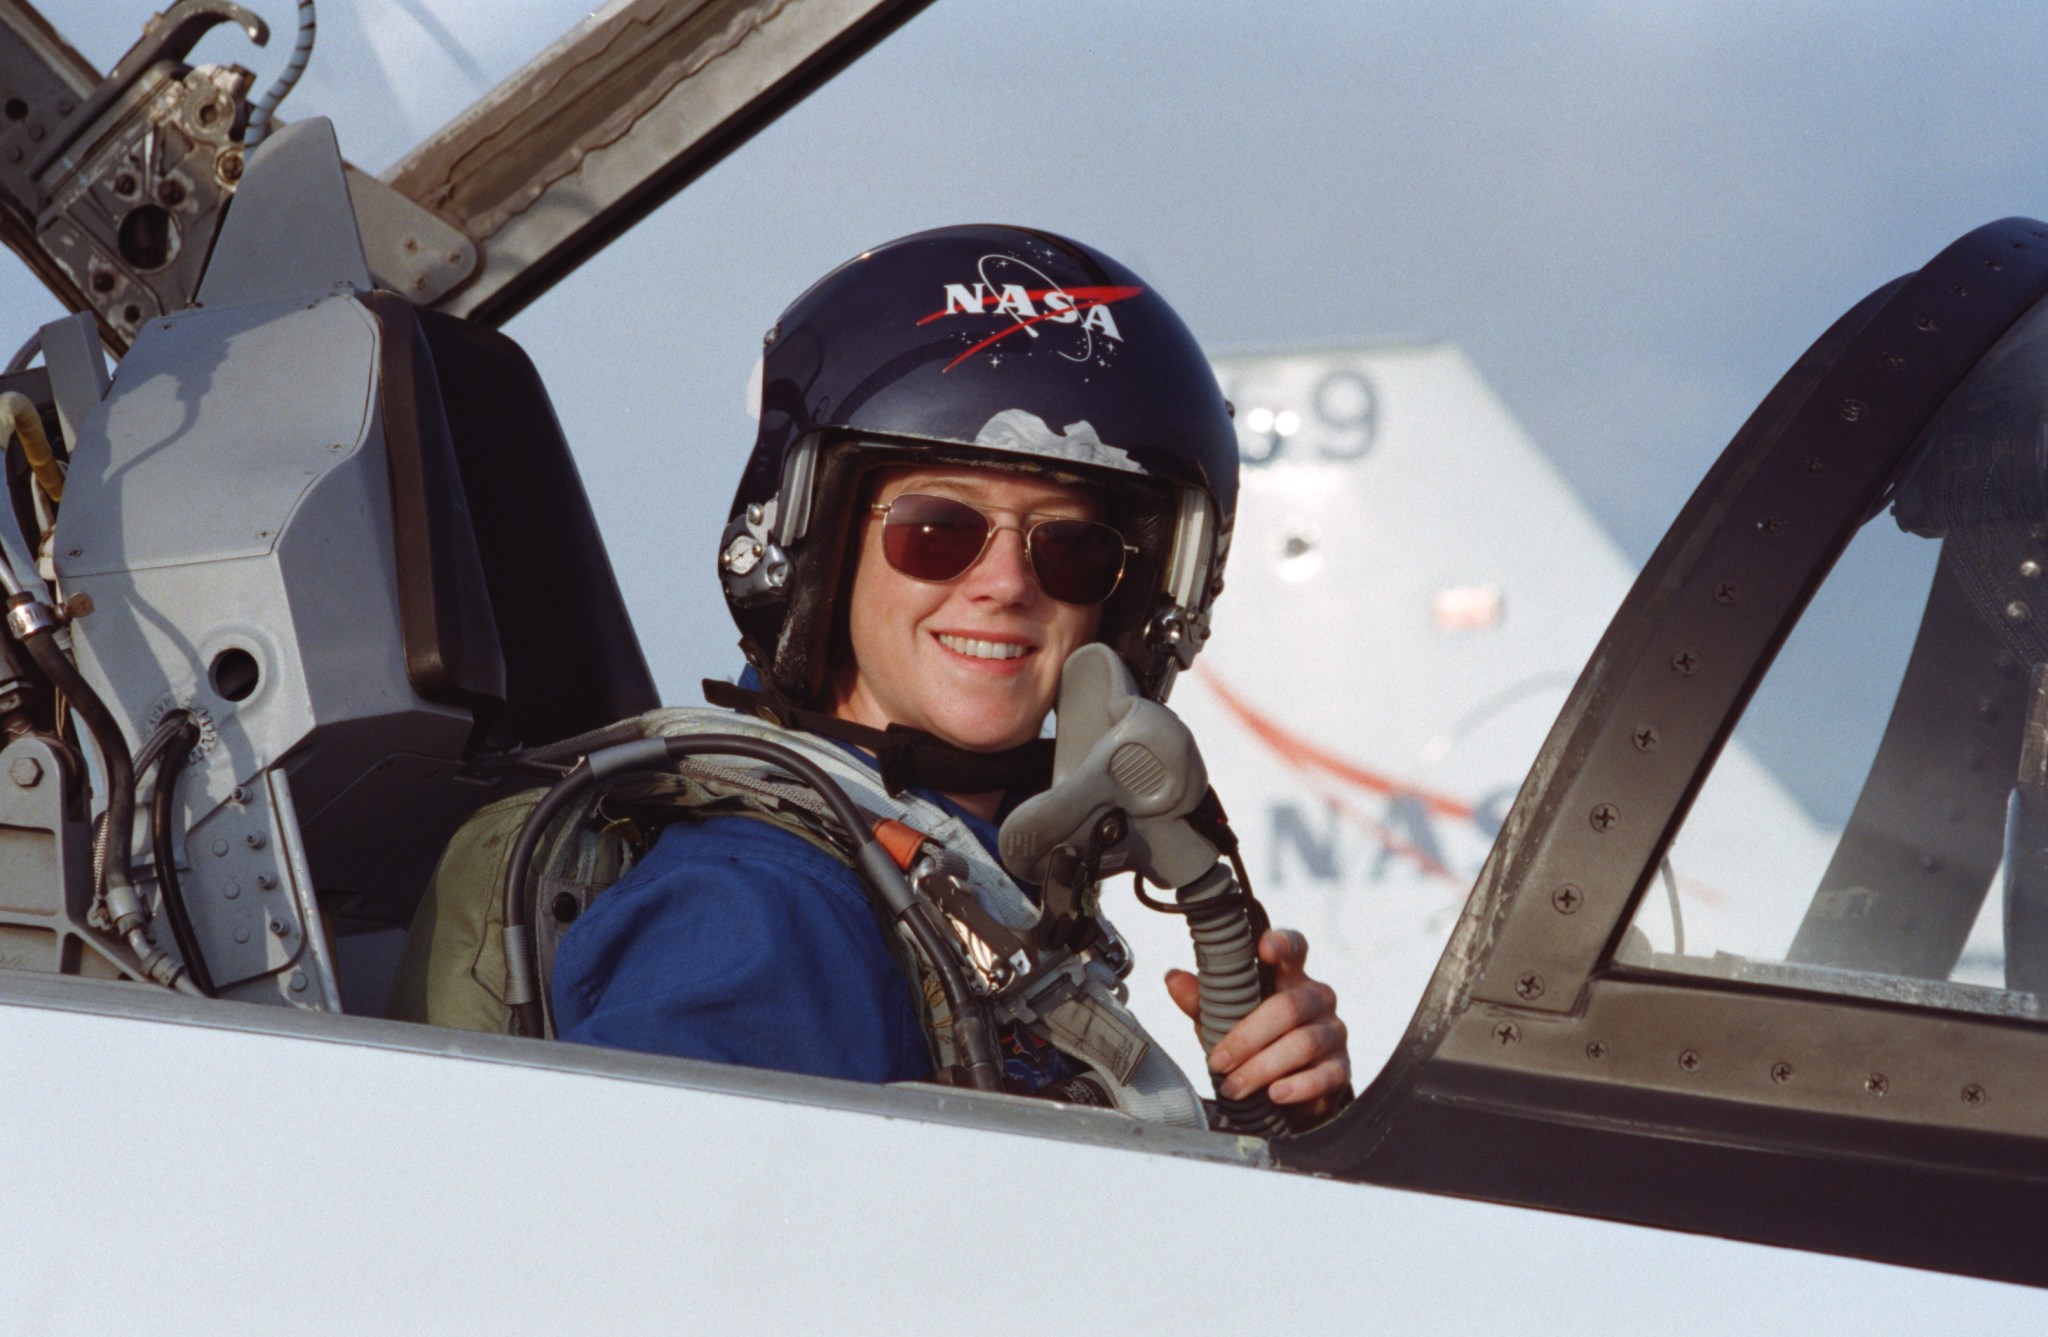 Pam Melroy, seated in forward station of a T-38 jet trainer in 2000 prior to joining other astronauts to train for a mission to the International Space Station.